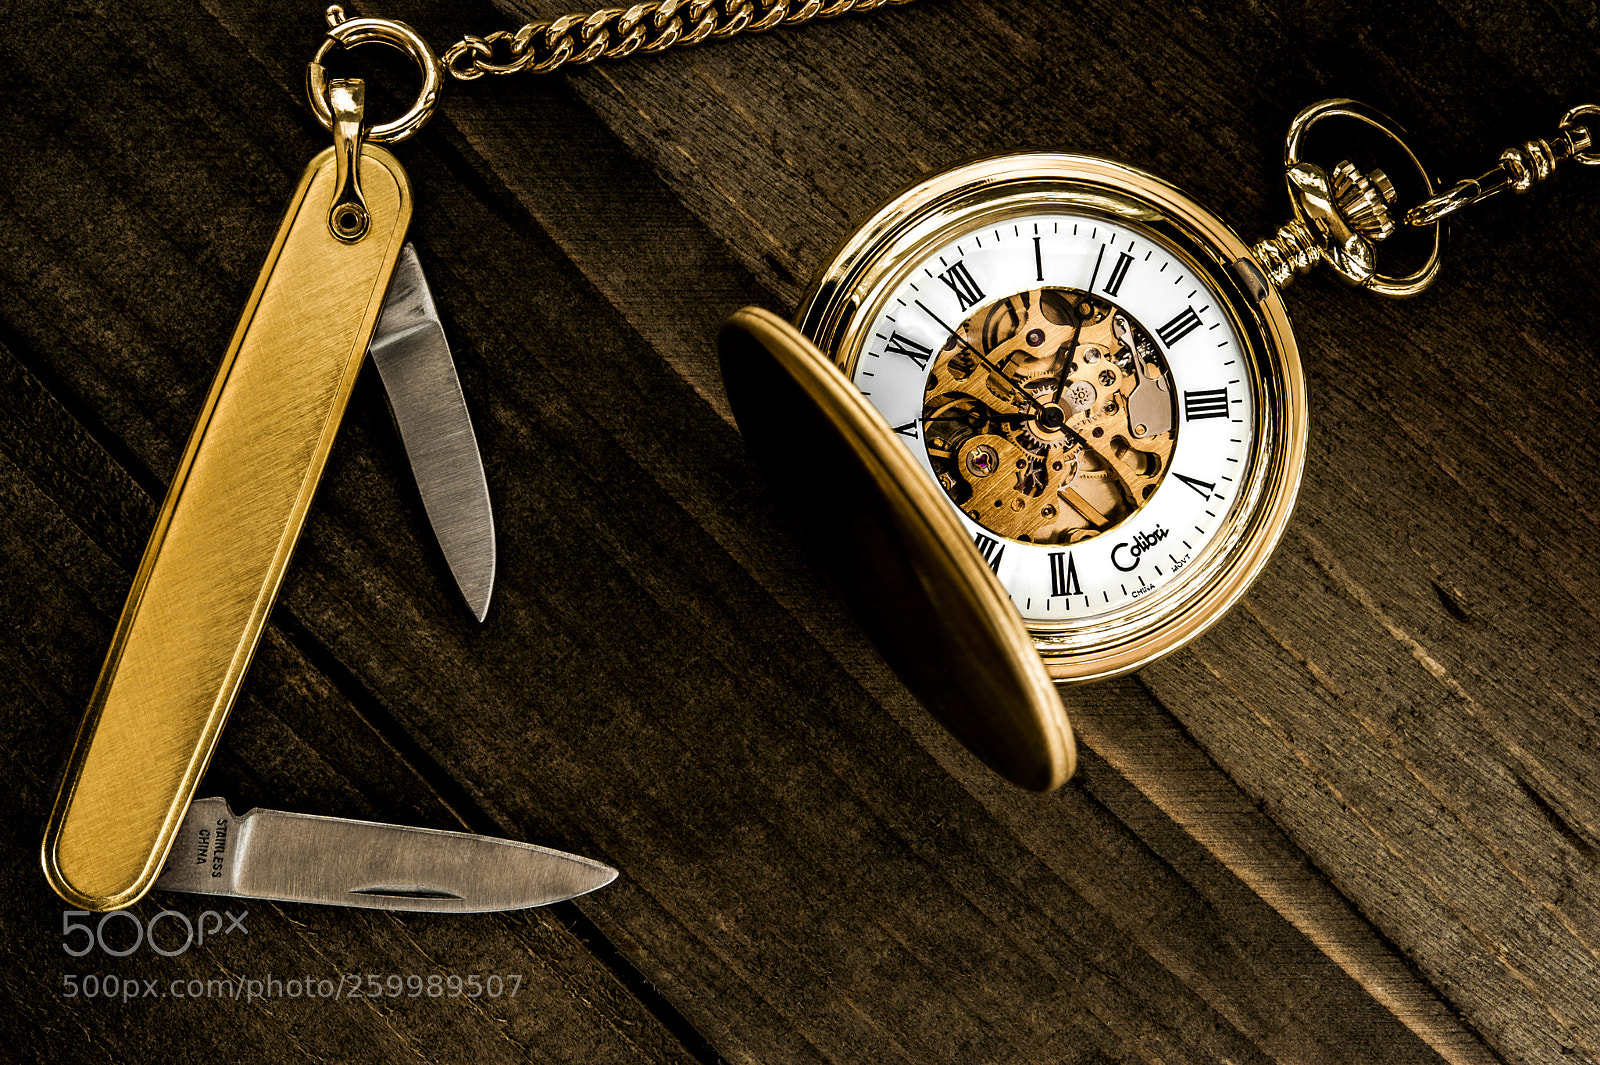 Nikon D700 sample photo. Pocket watch with blades photography